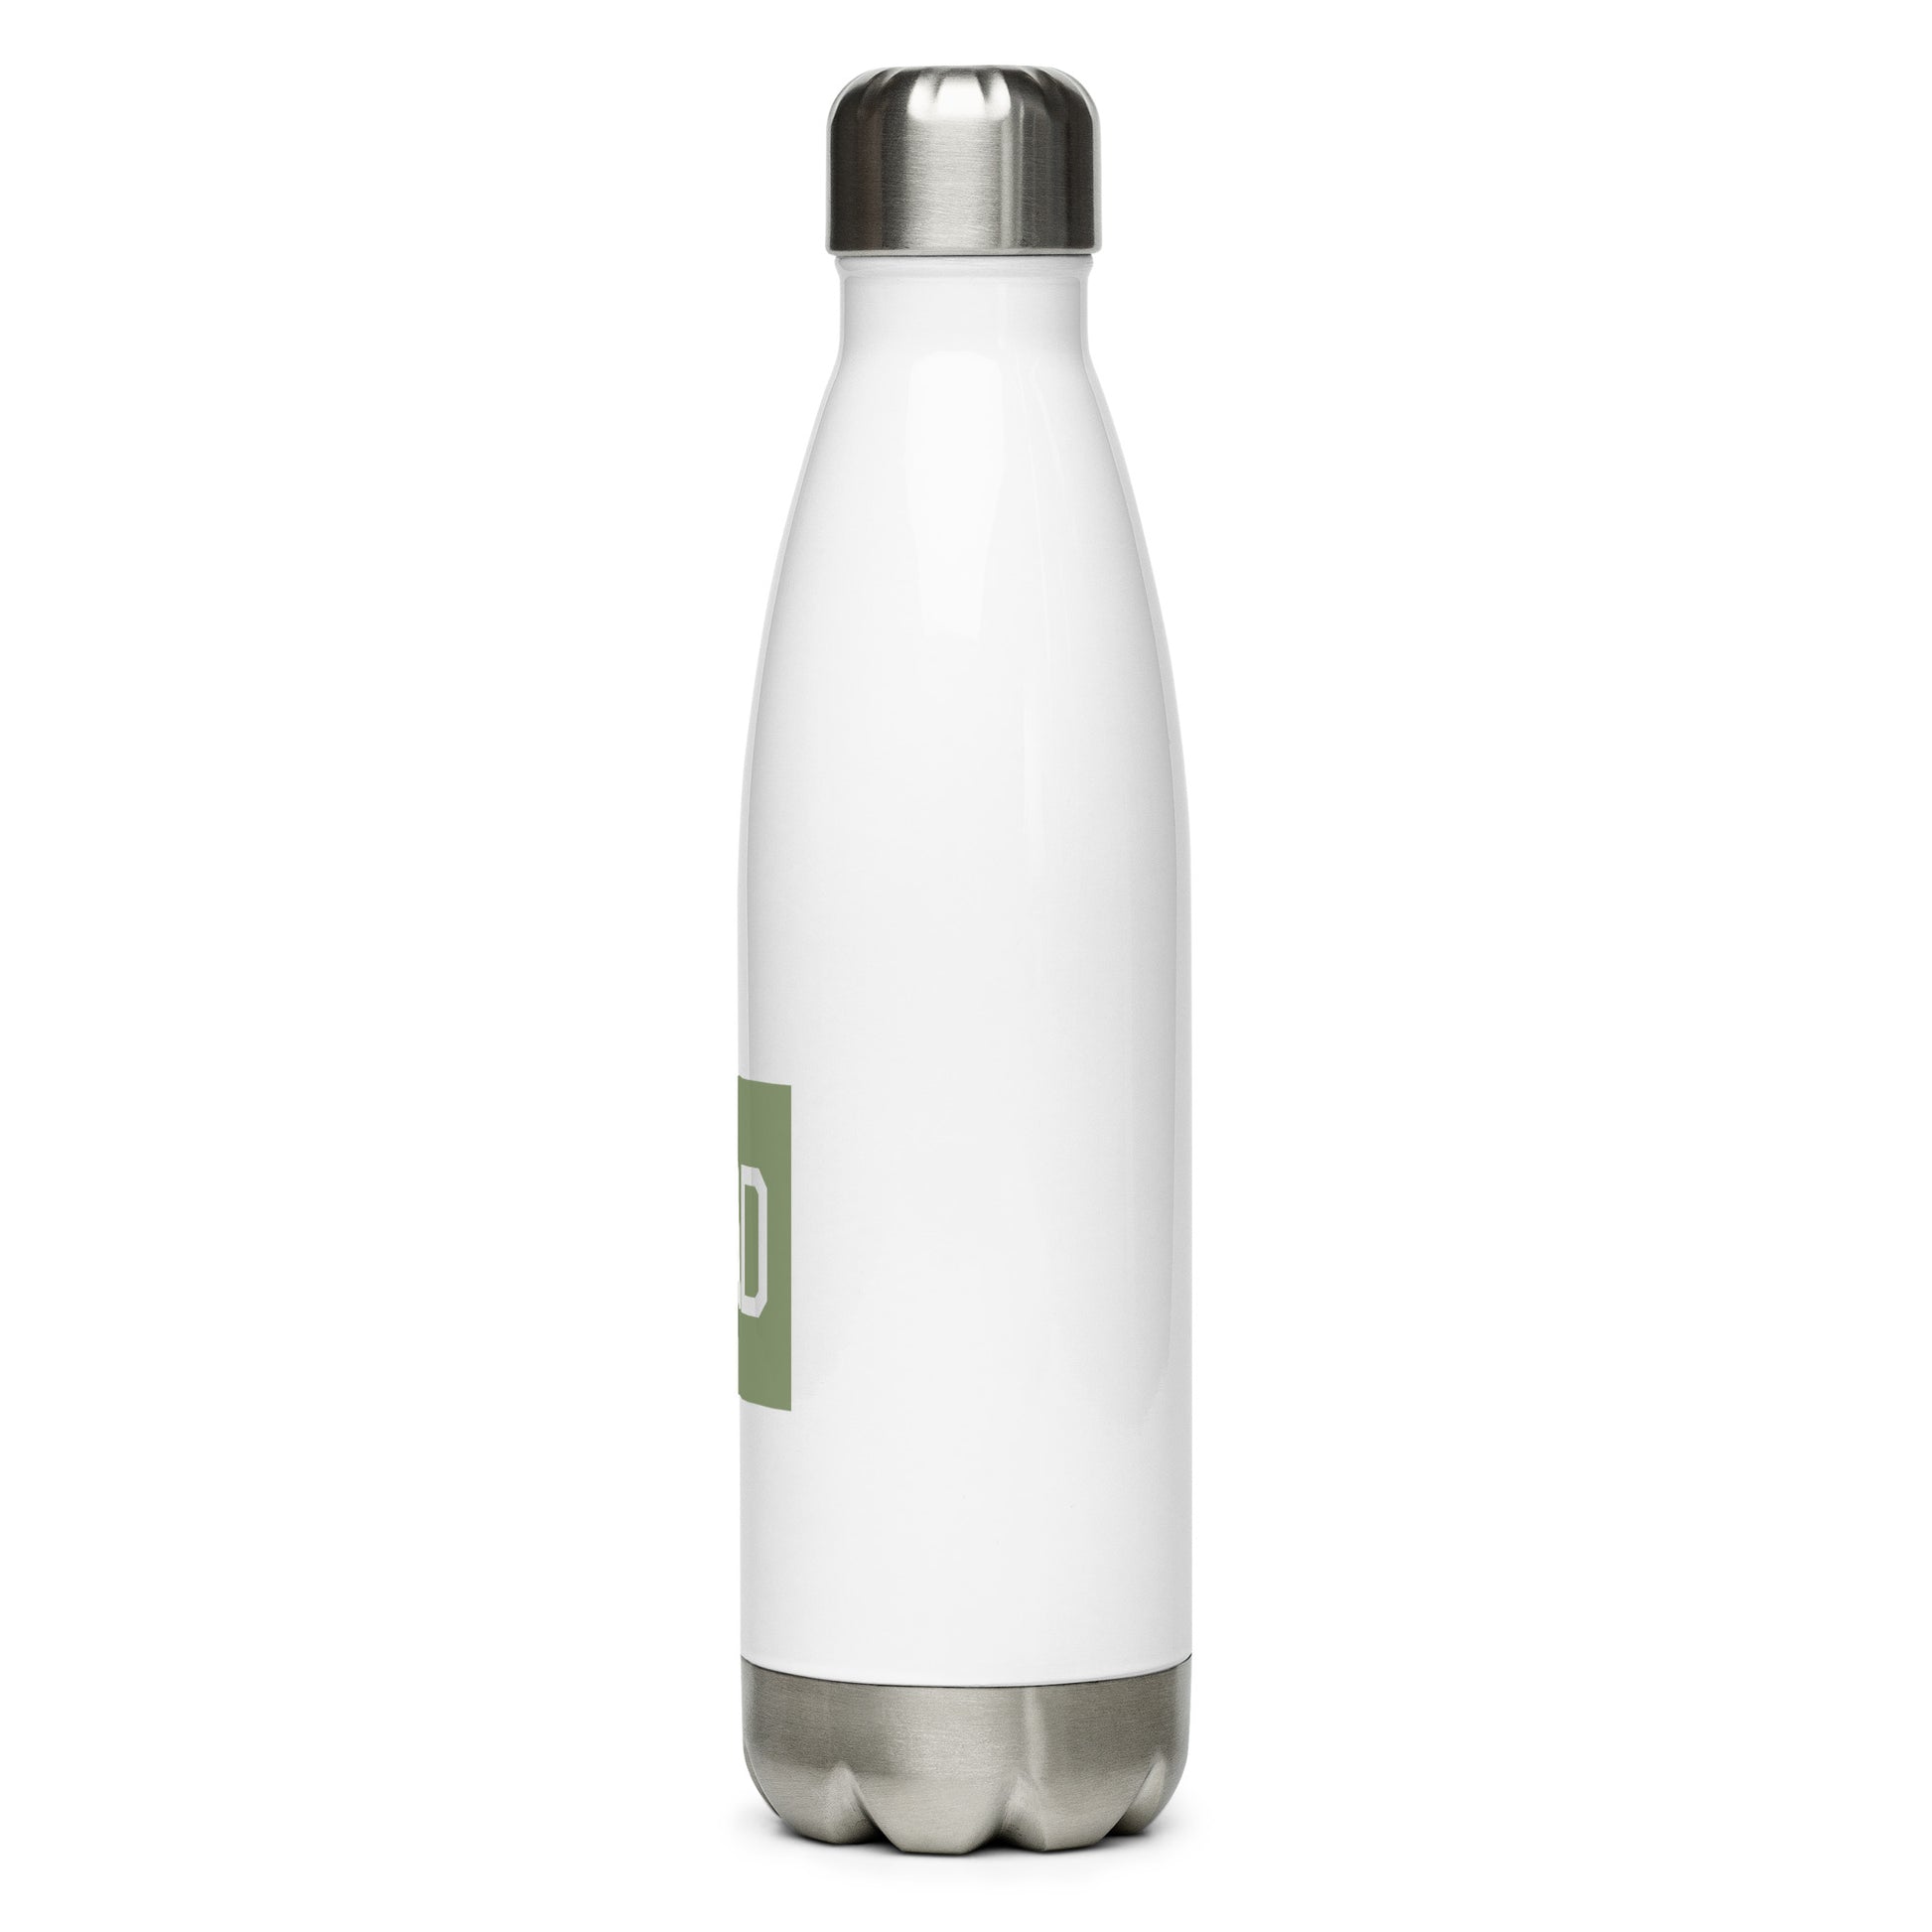 Aviation Gift Water Bottle - Camo Green • MAD Madrid • YHM Designs - Image 08